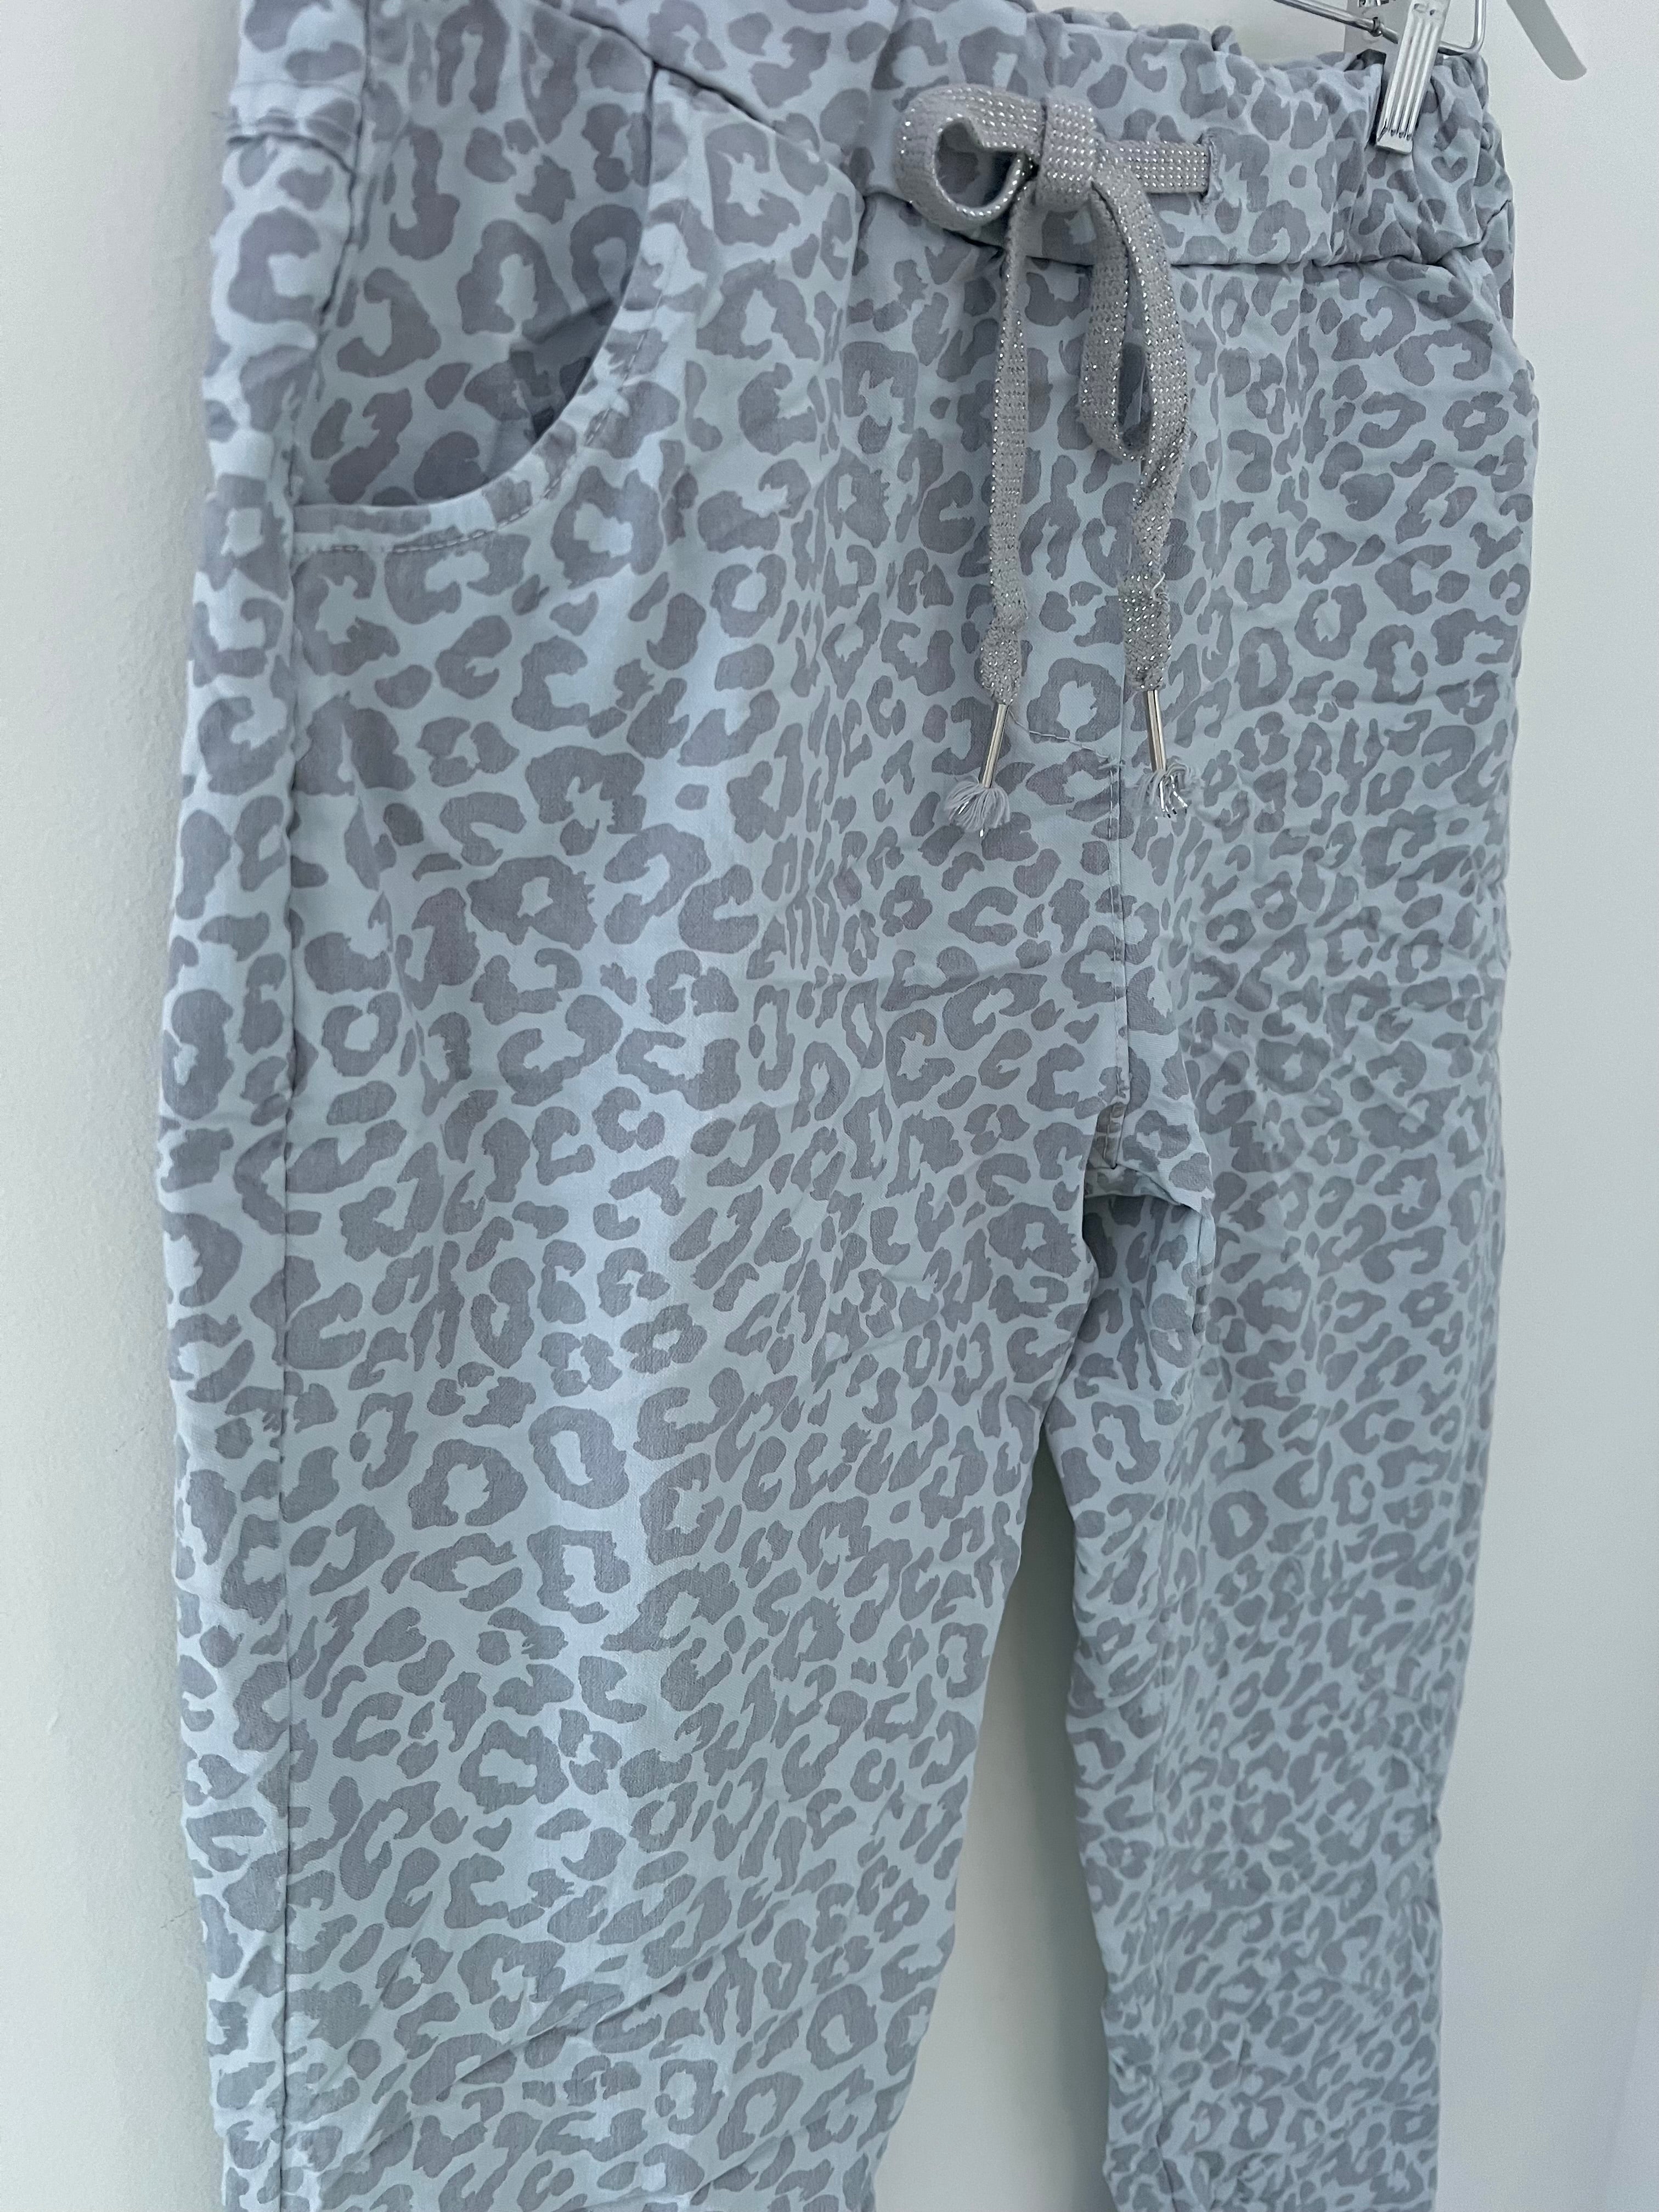 Slimfit Cotton Stretch Joggers in Grey Leopard